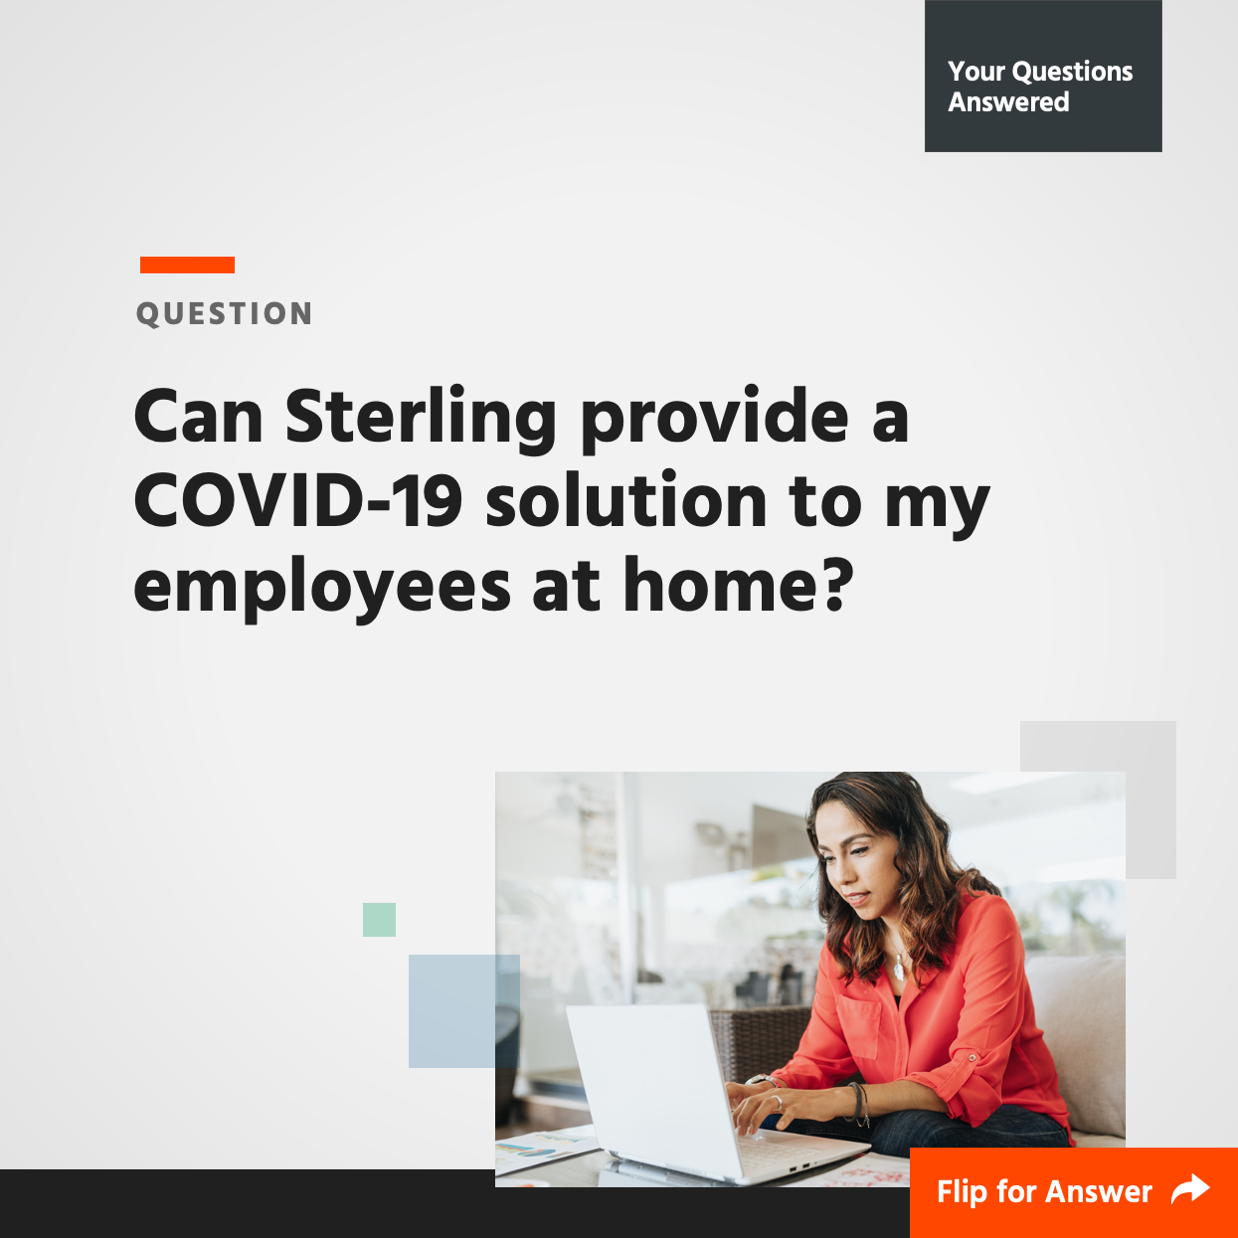 Can Sterling provide a COVID-19 solution to my employees at home?